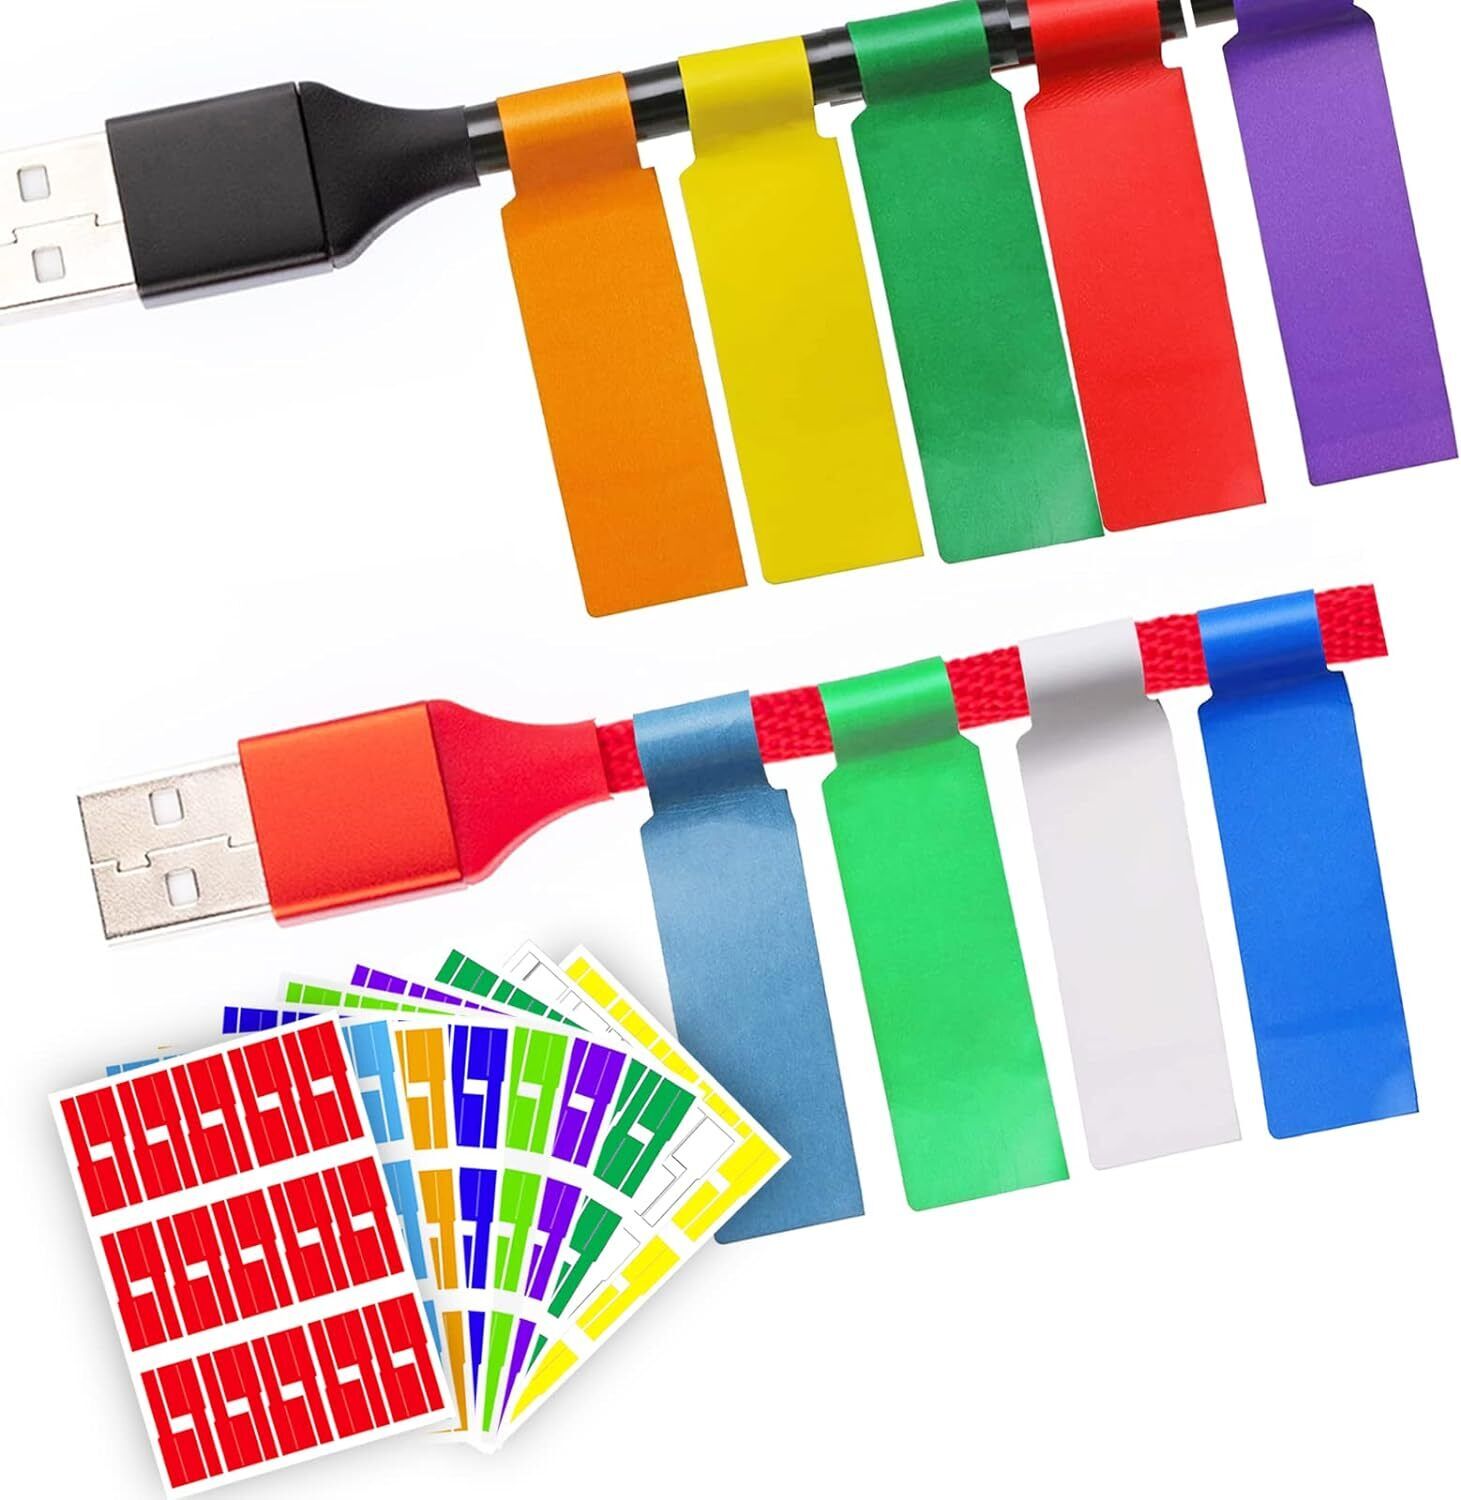 270 PCS Cable Labels 9 Colors Waterproof Tags Wire Can Write On for Laser Printe